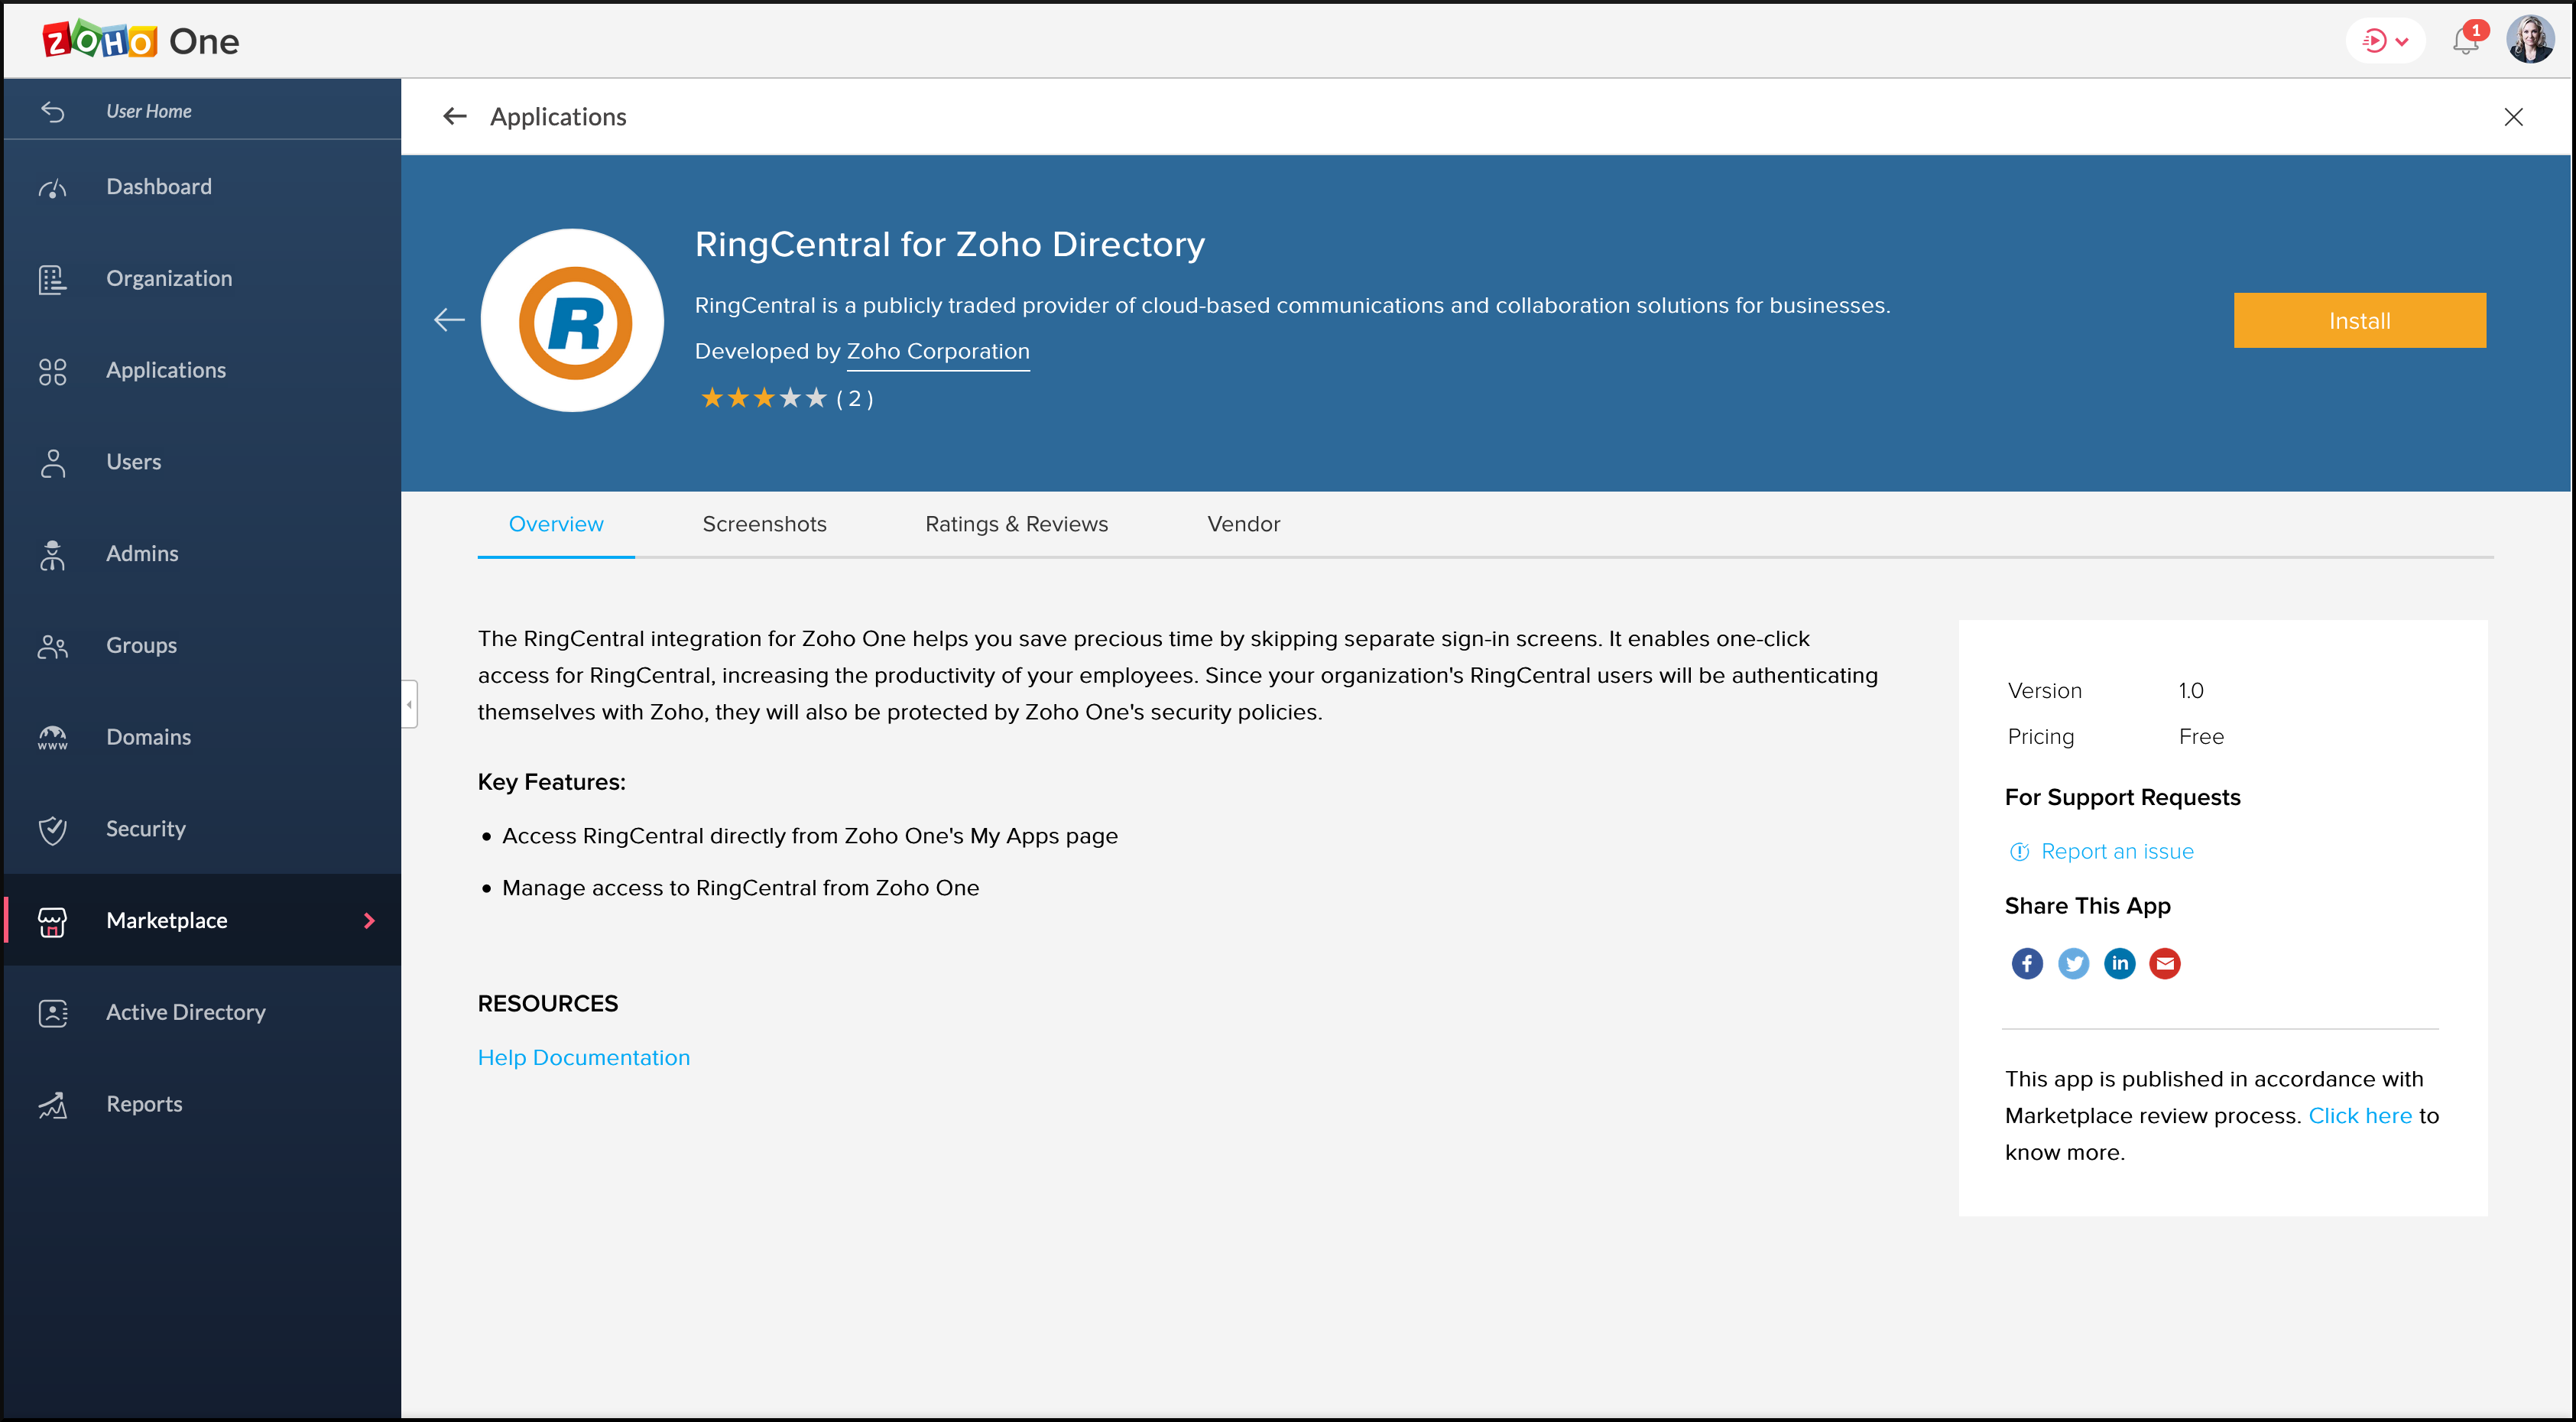 RingCentral's installation page in Zoho Marketplace